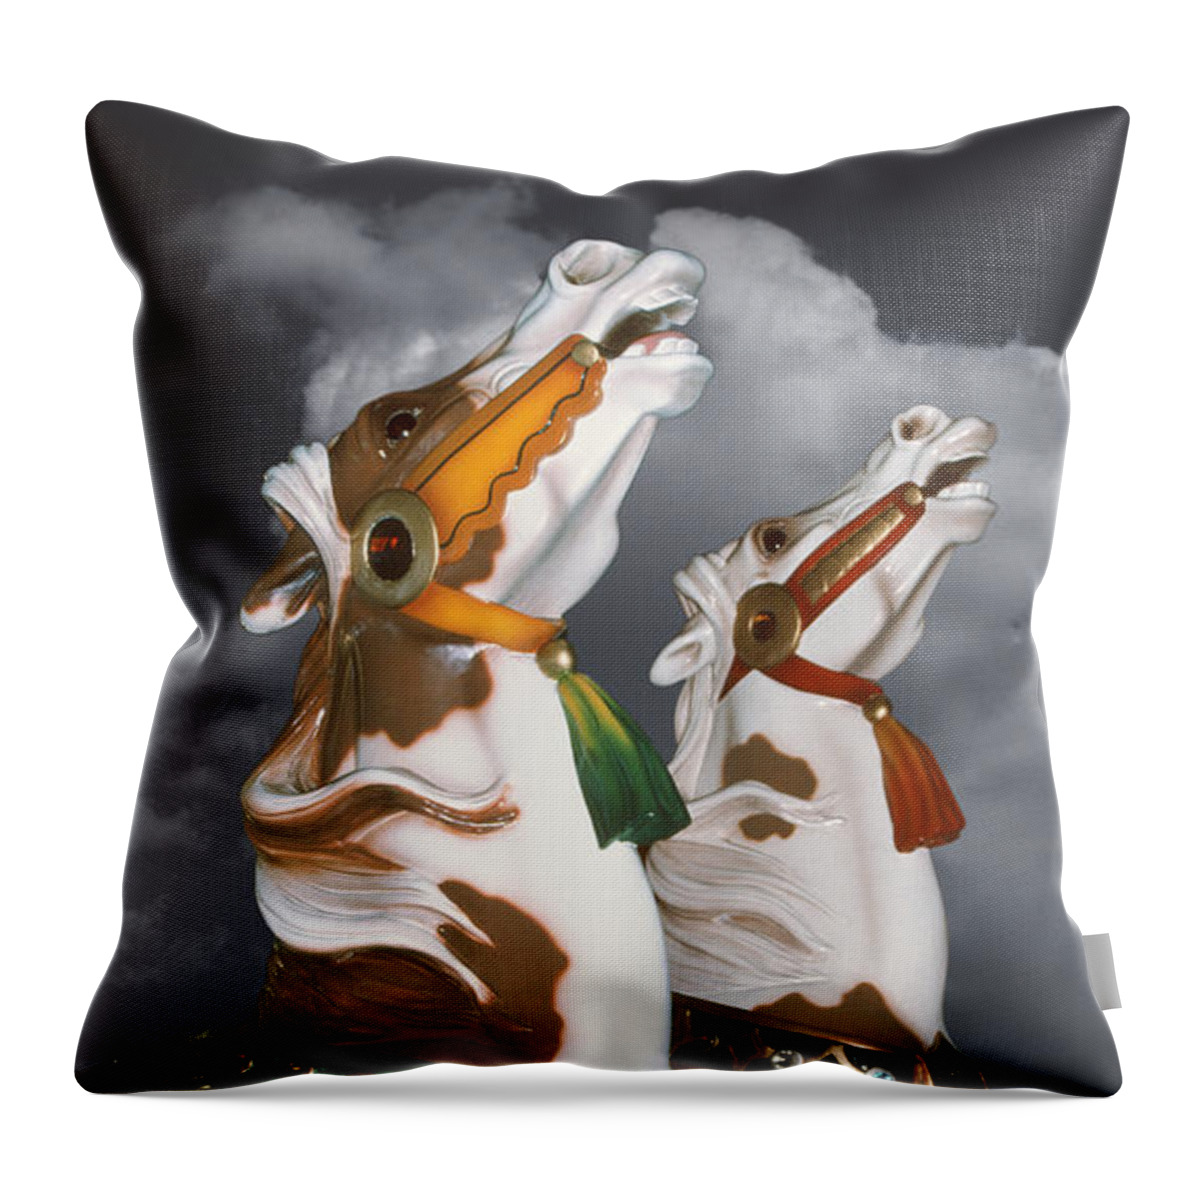 Carousel Throw Pillow featuring the photograph surreal carousel horses - Flying Pintos by Sharon Hudson